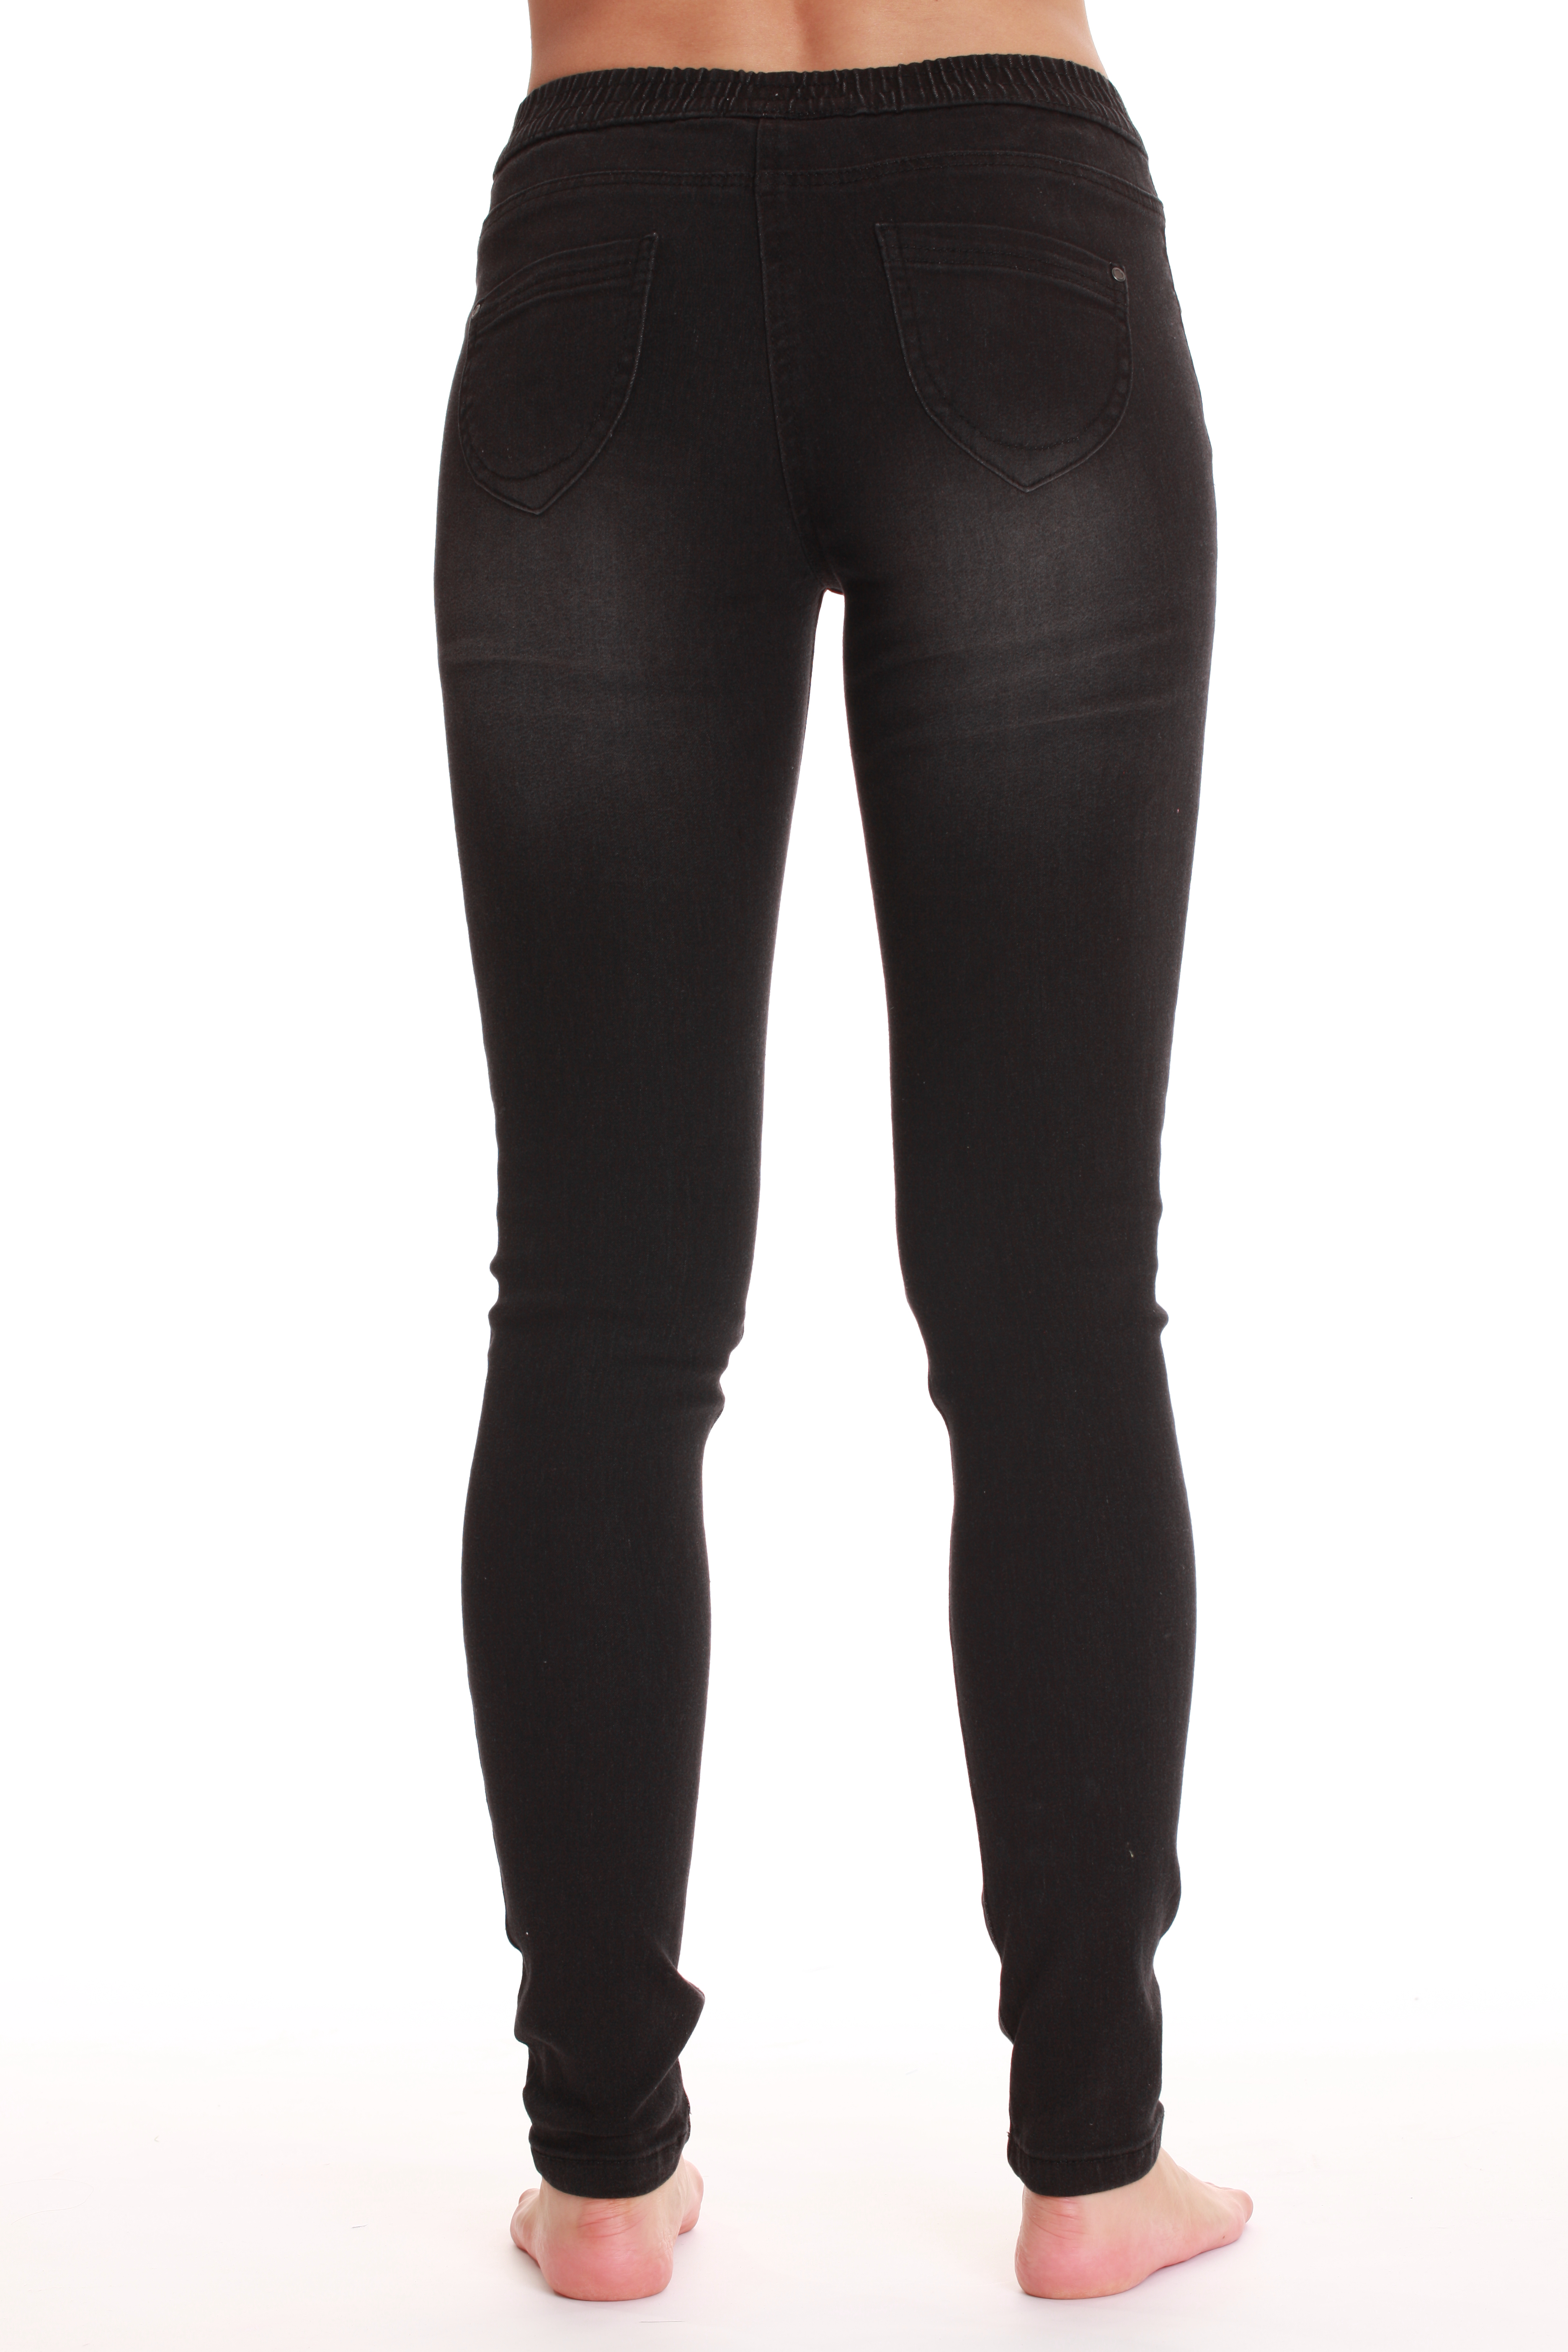 Just Love Women's Denim Jeggings with Pockets - Comfortable Stretch Jeans Leggings (Black Denim, Small) - image 2 of 2